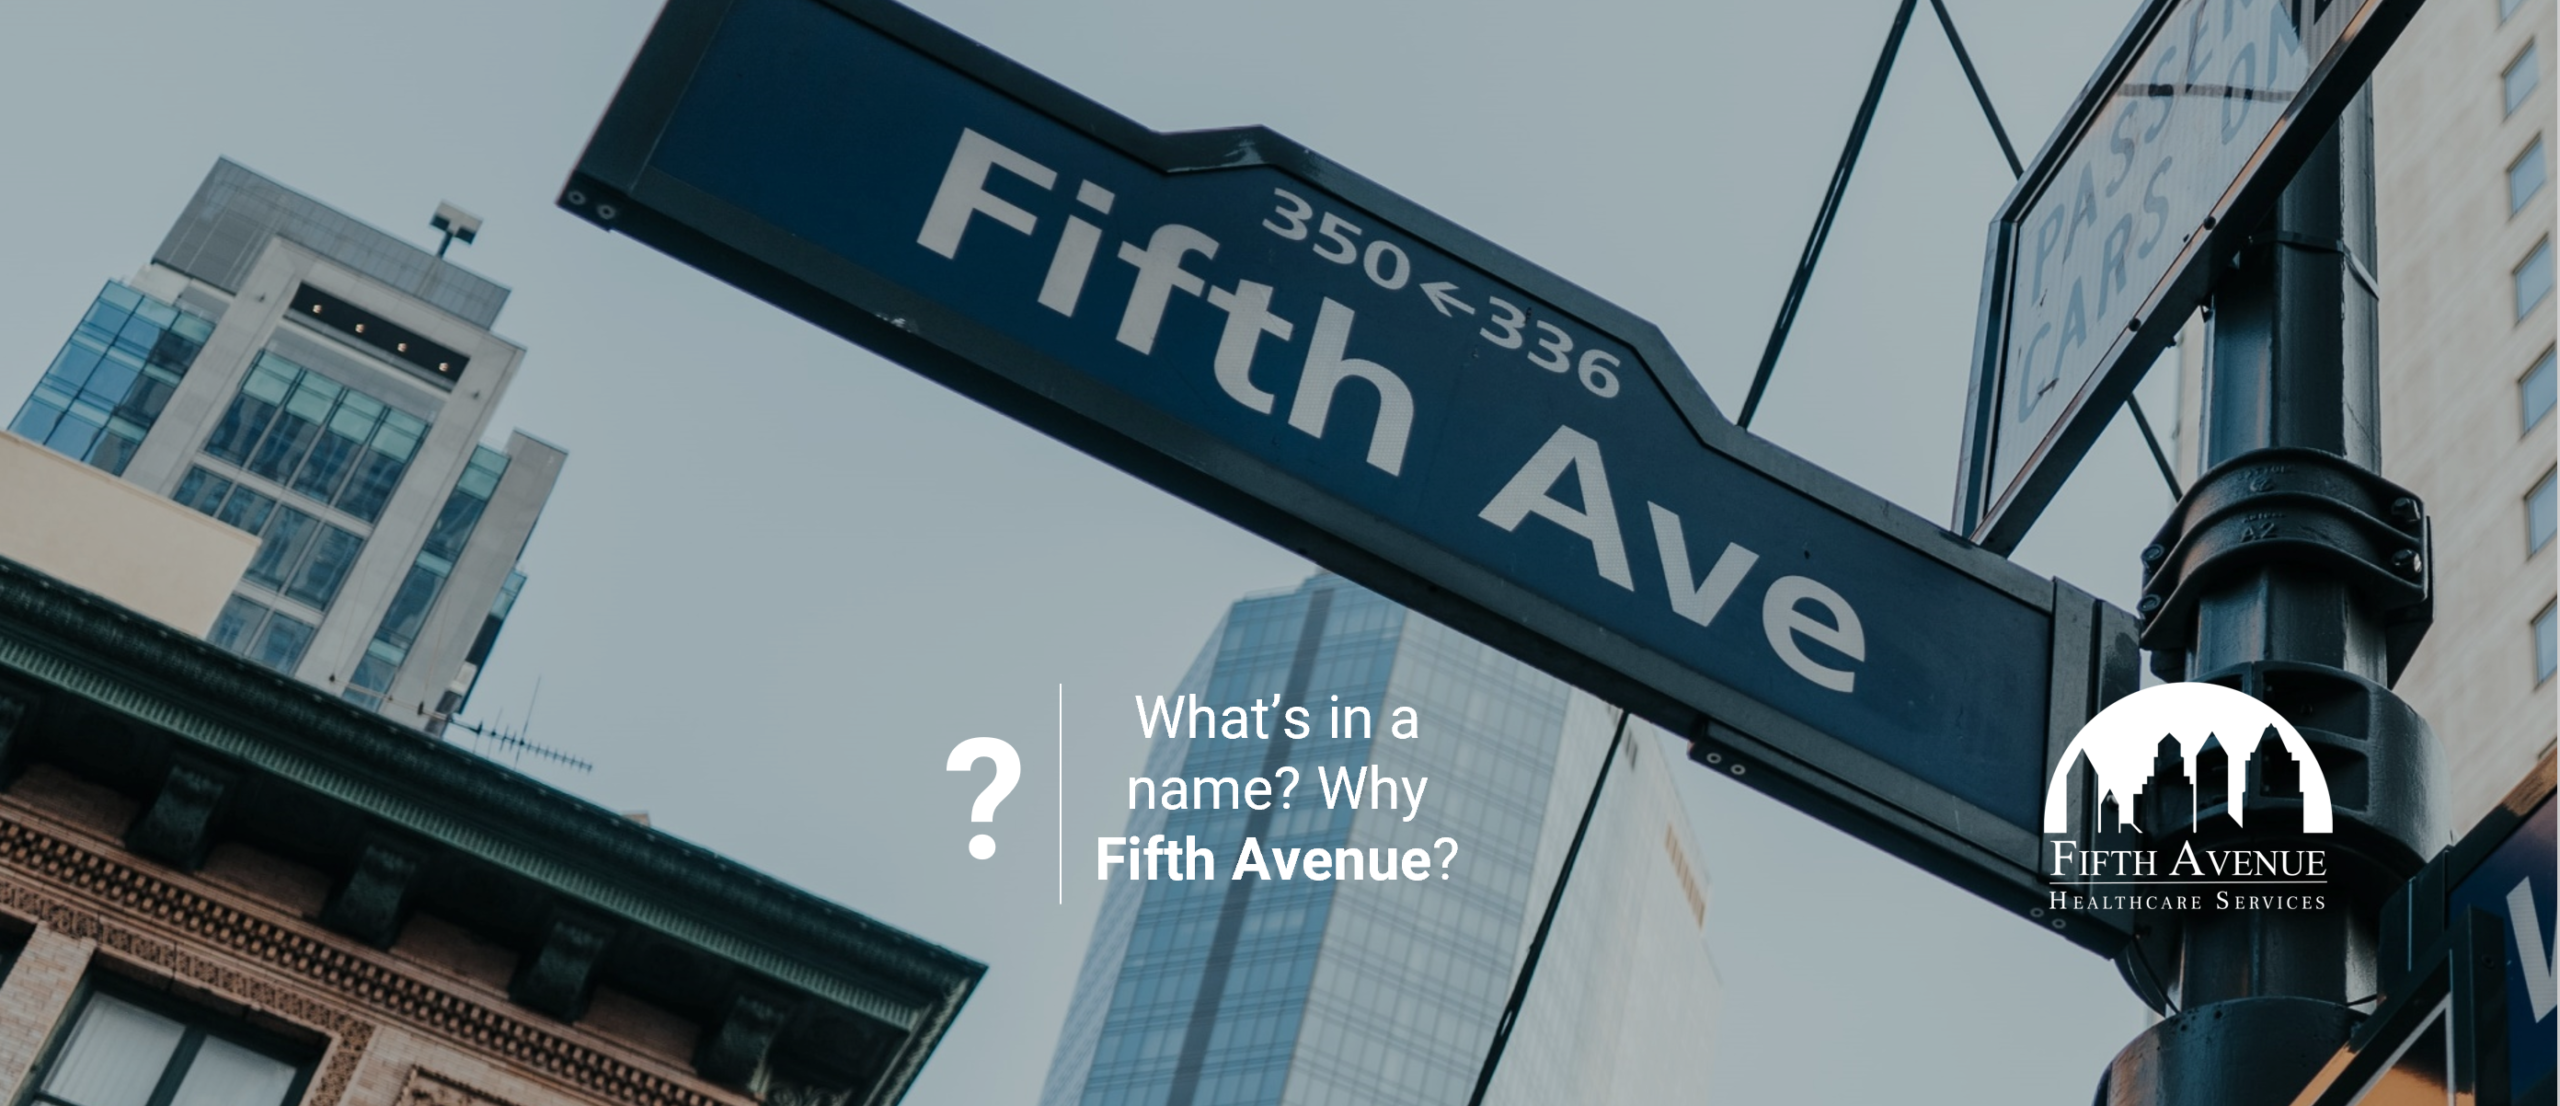 What's in a name? Why Fifth Avenue?